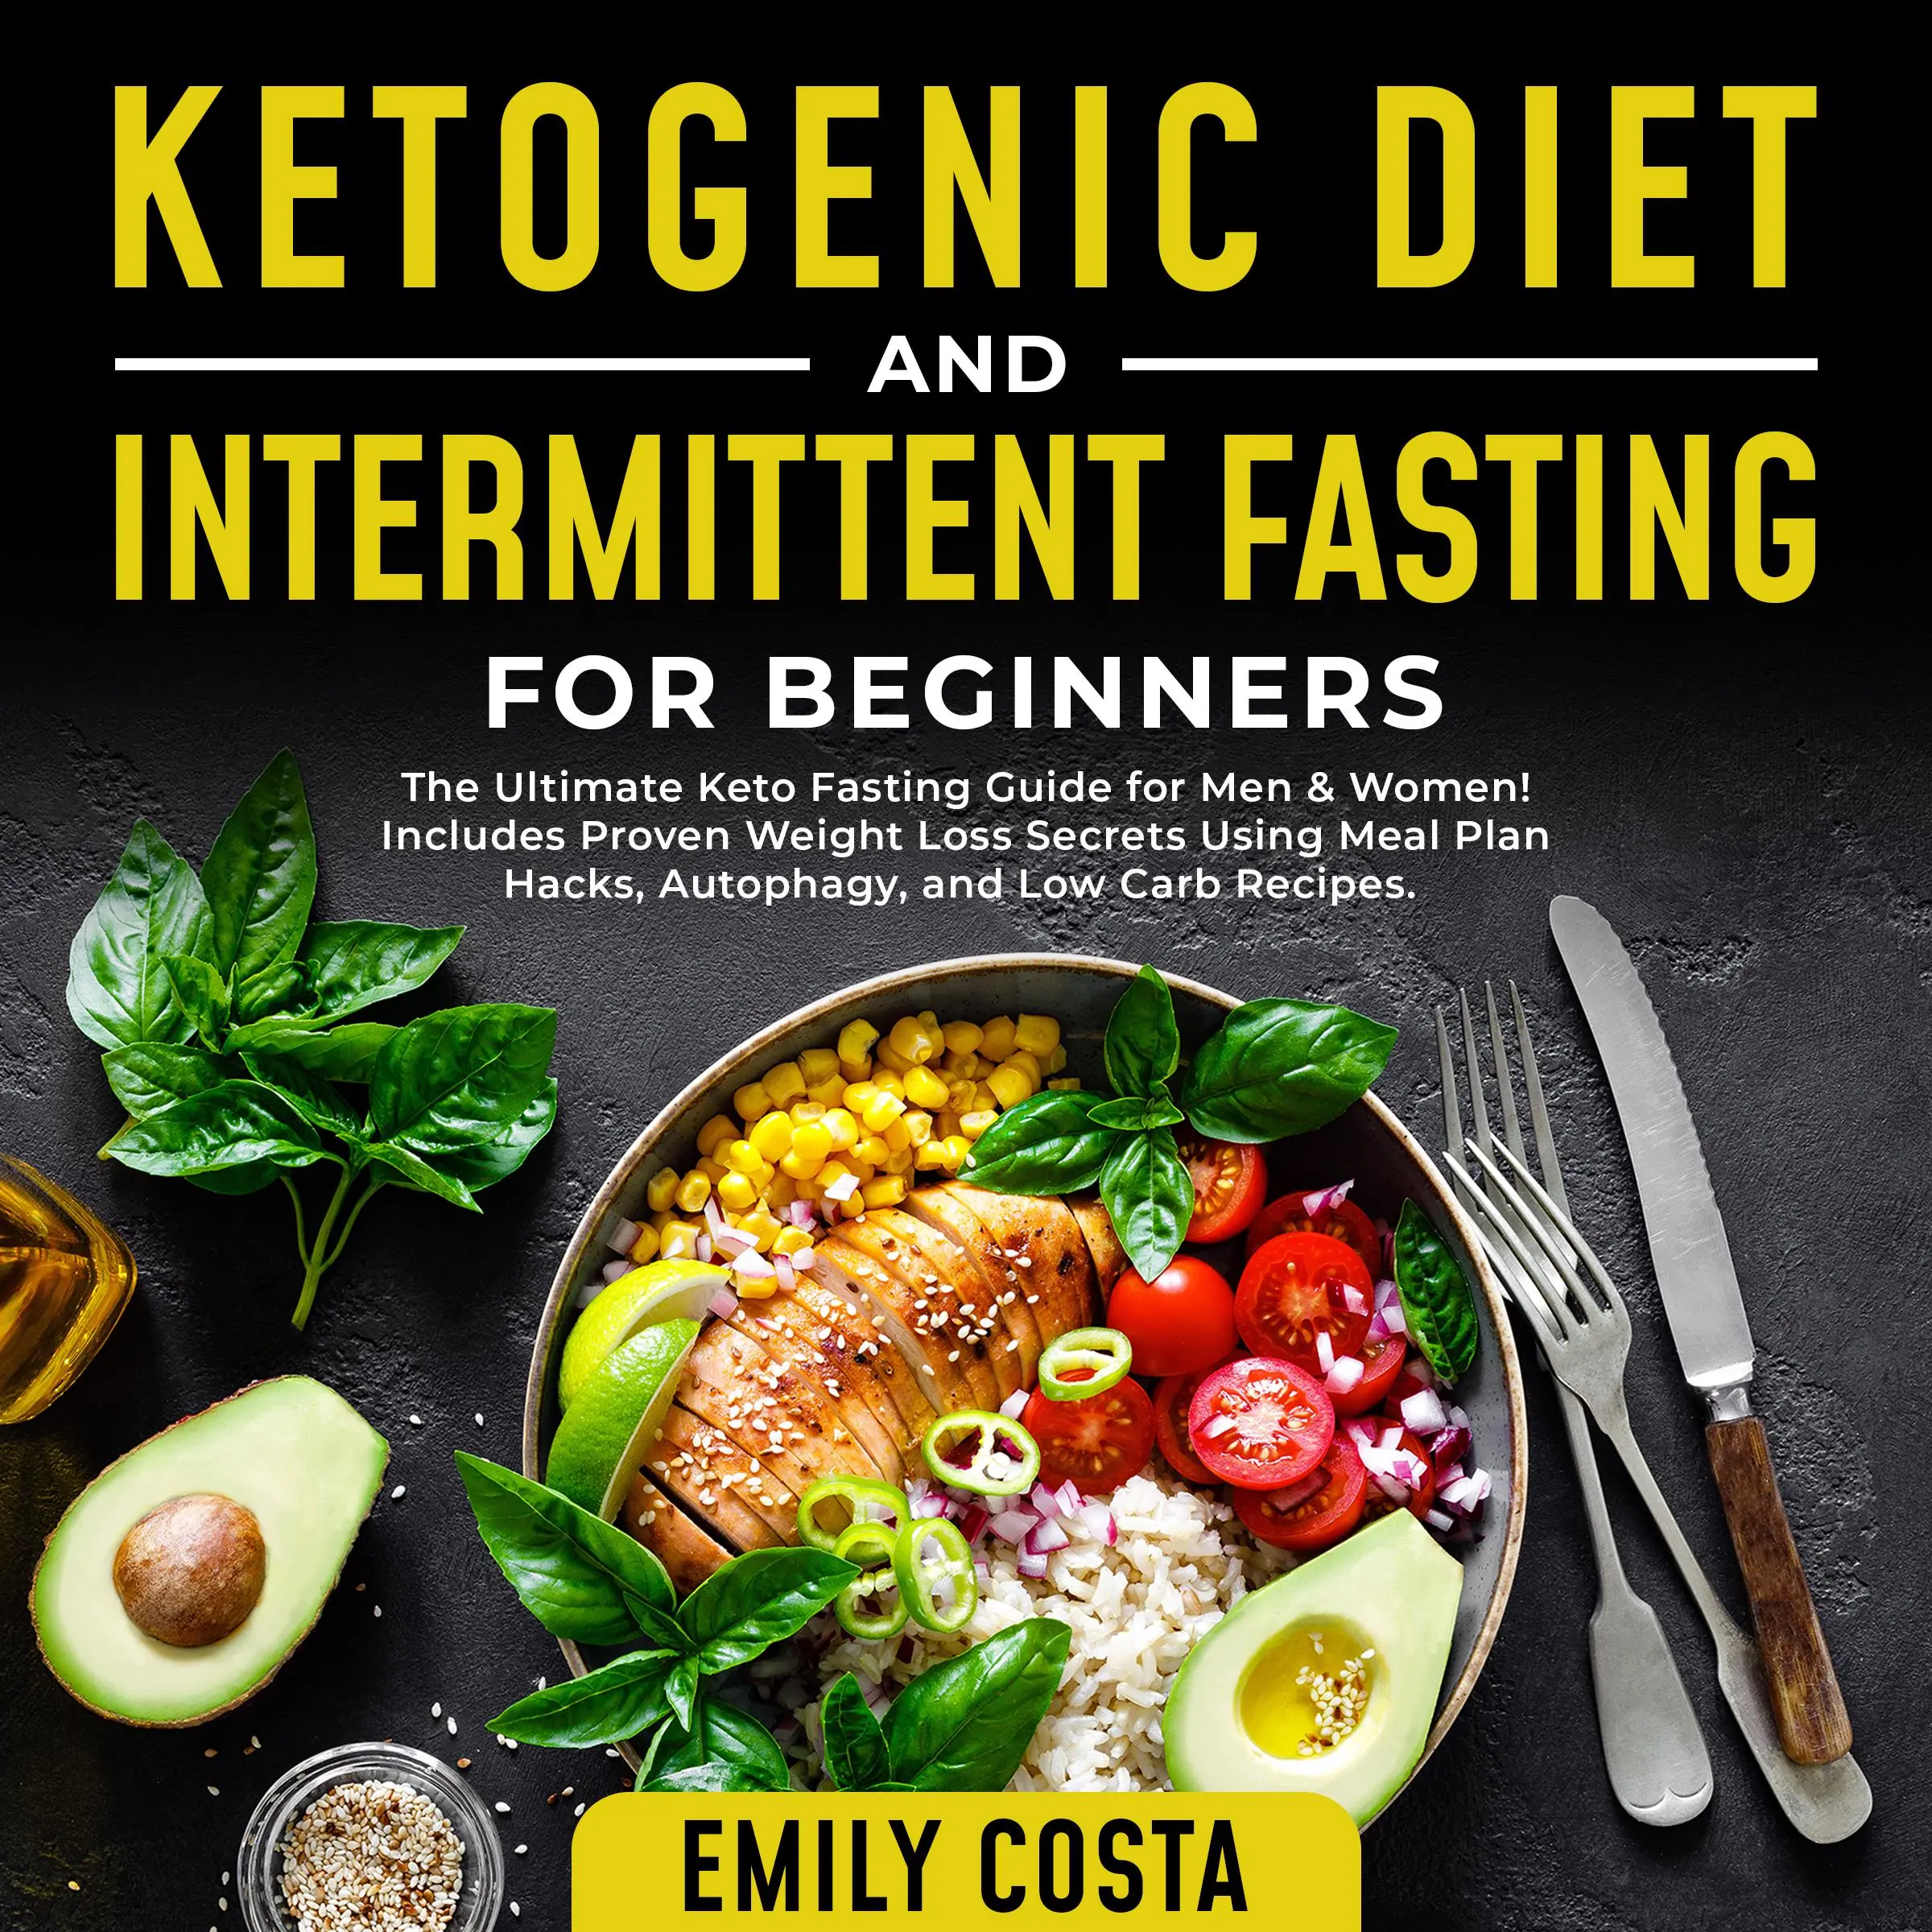 Ketogenic Diet and Intermittent Fasting for Beginners: The Ultimate Keto Fasting Guide for Men & Women! Includes Proven Weight Loss Secrets Using Meal Plan Hacks, Autophagy, and Low Carb Recipes. Audiobook by Emily Costa